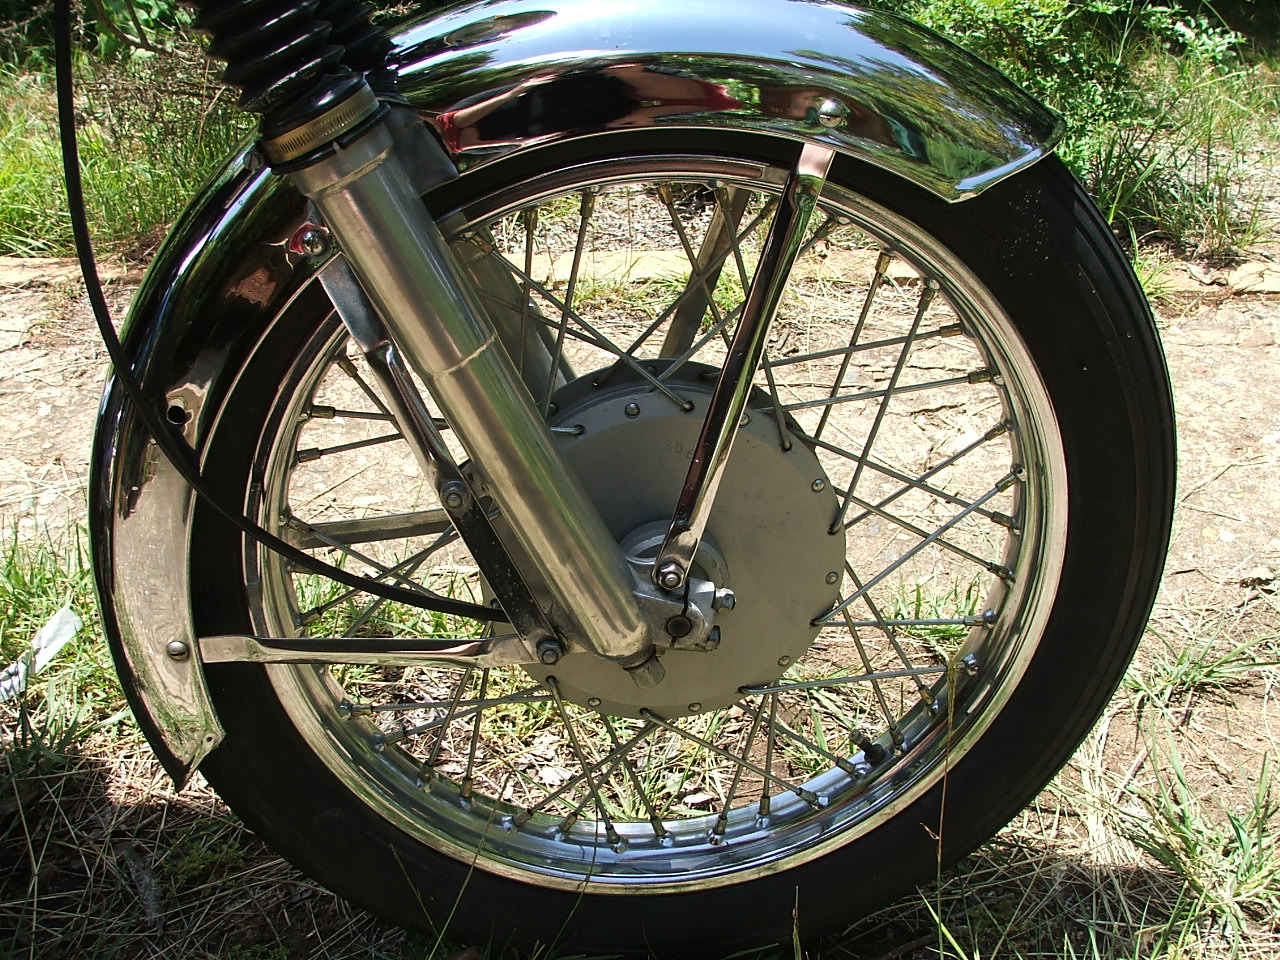 Right front wheel, 350 enfield